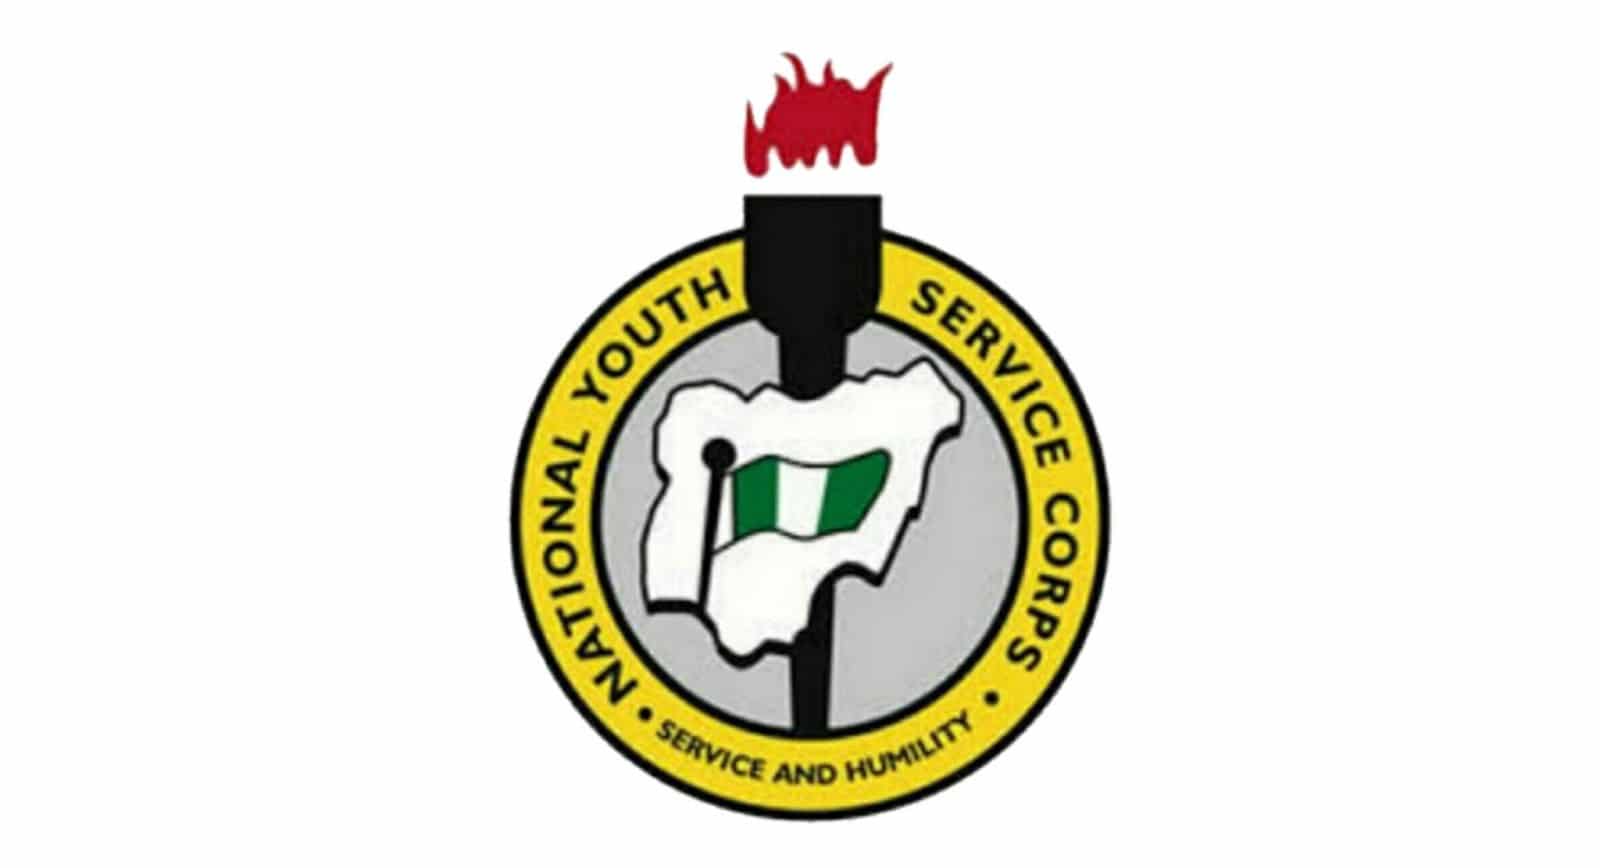 Nigeria news : Get approval before using corps members’ uniform in movies – NYSC tells filmmakers